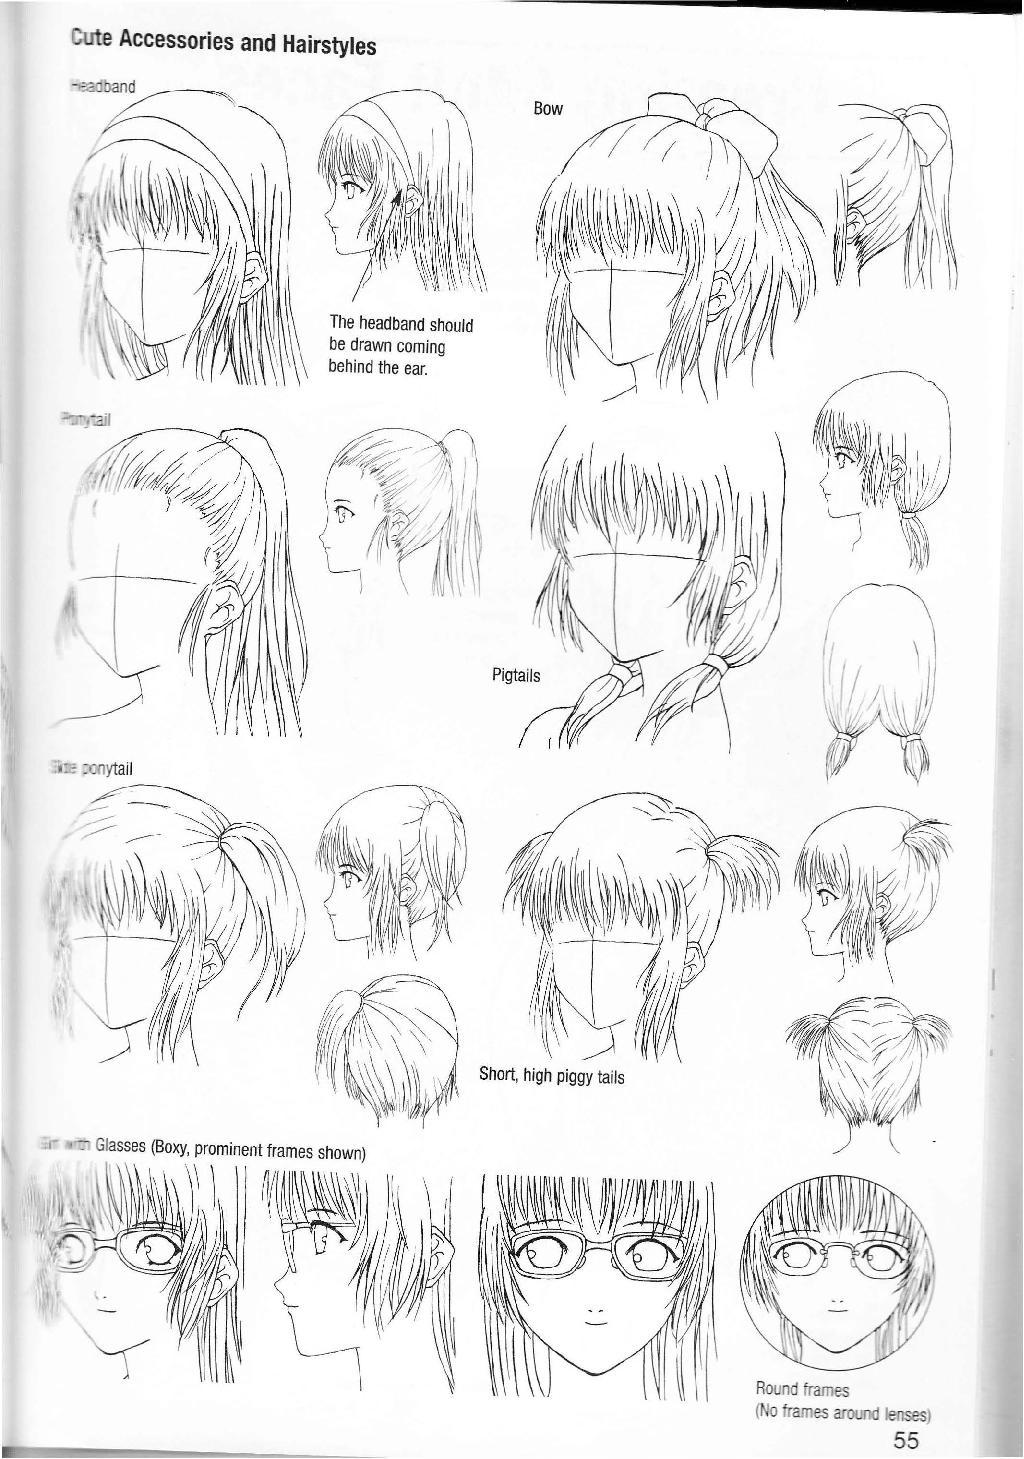 More How to Draw Manga Vol. 2 - Penning Characters 56